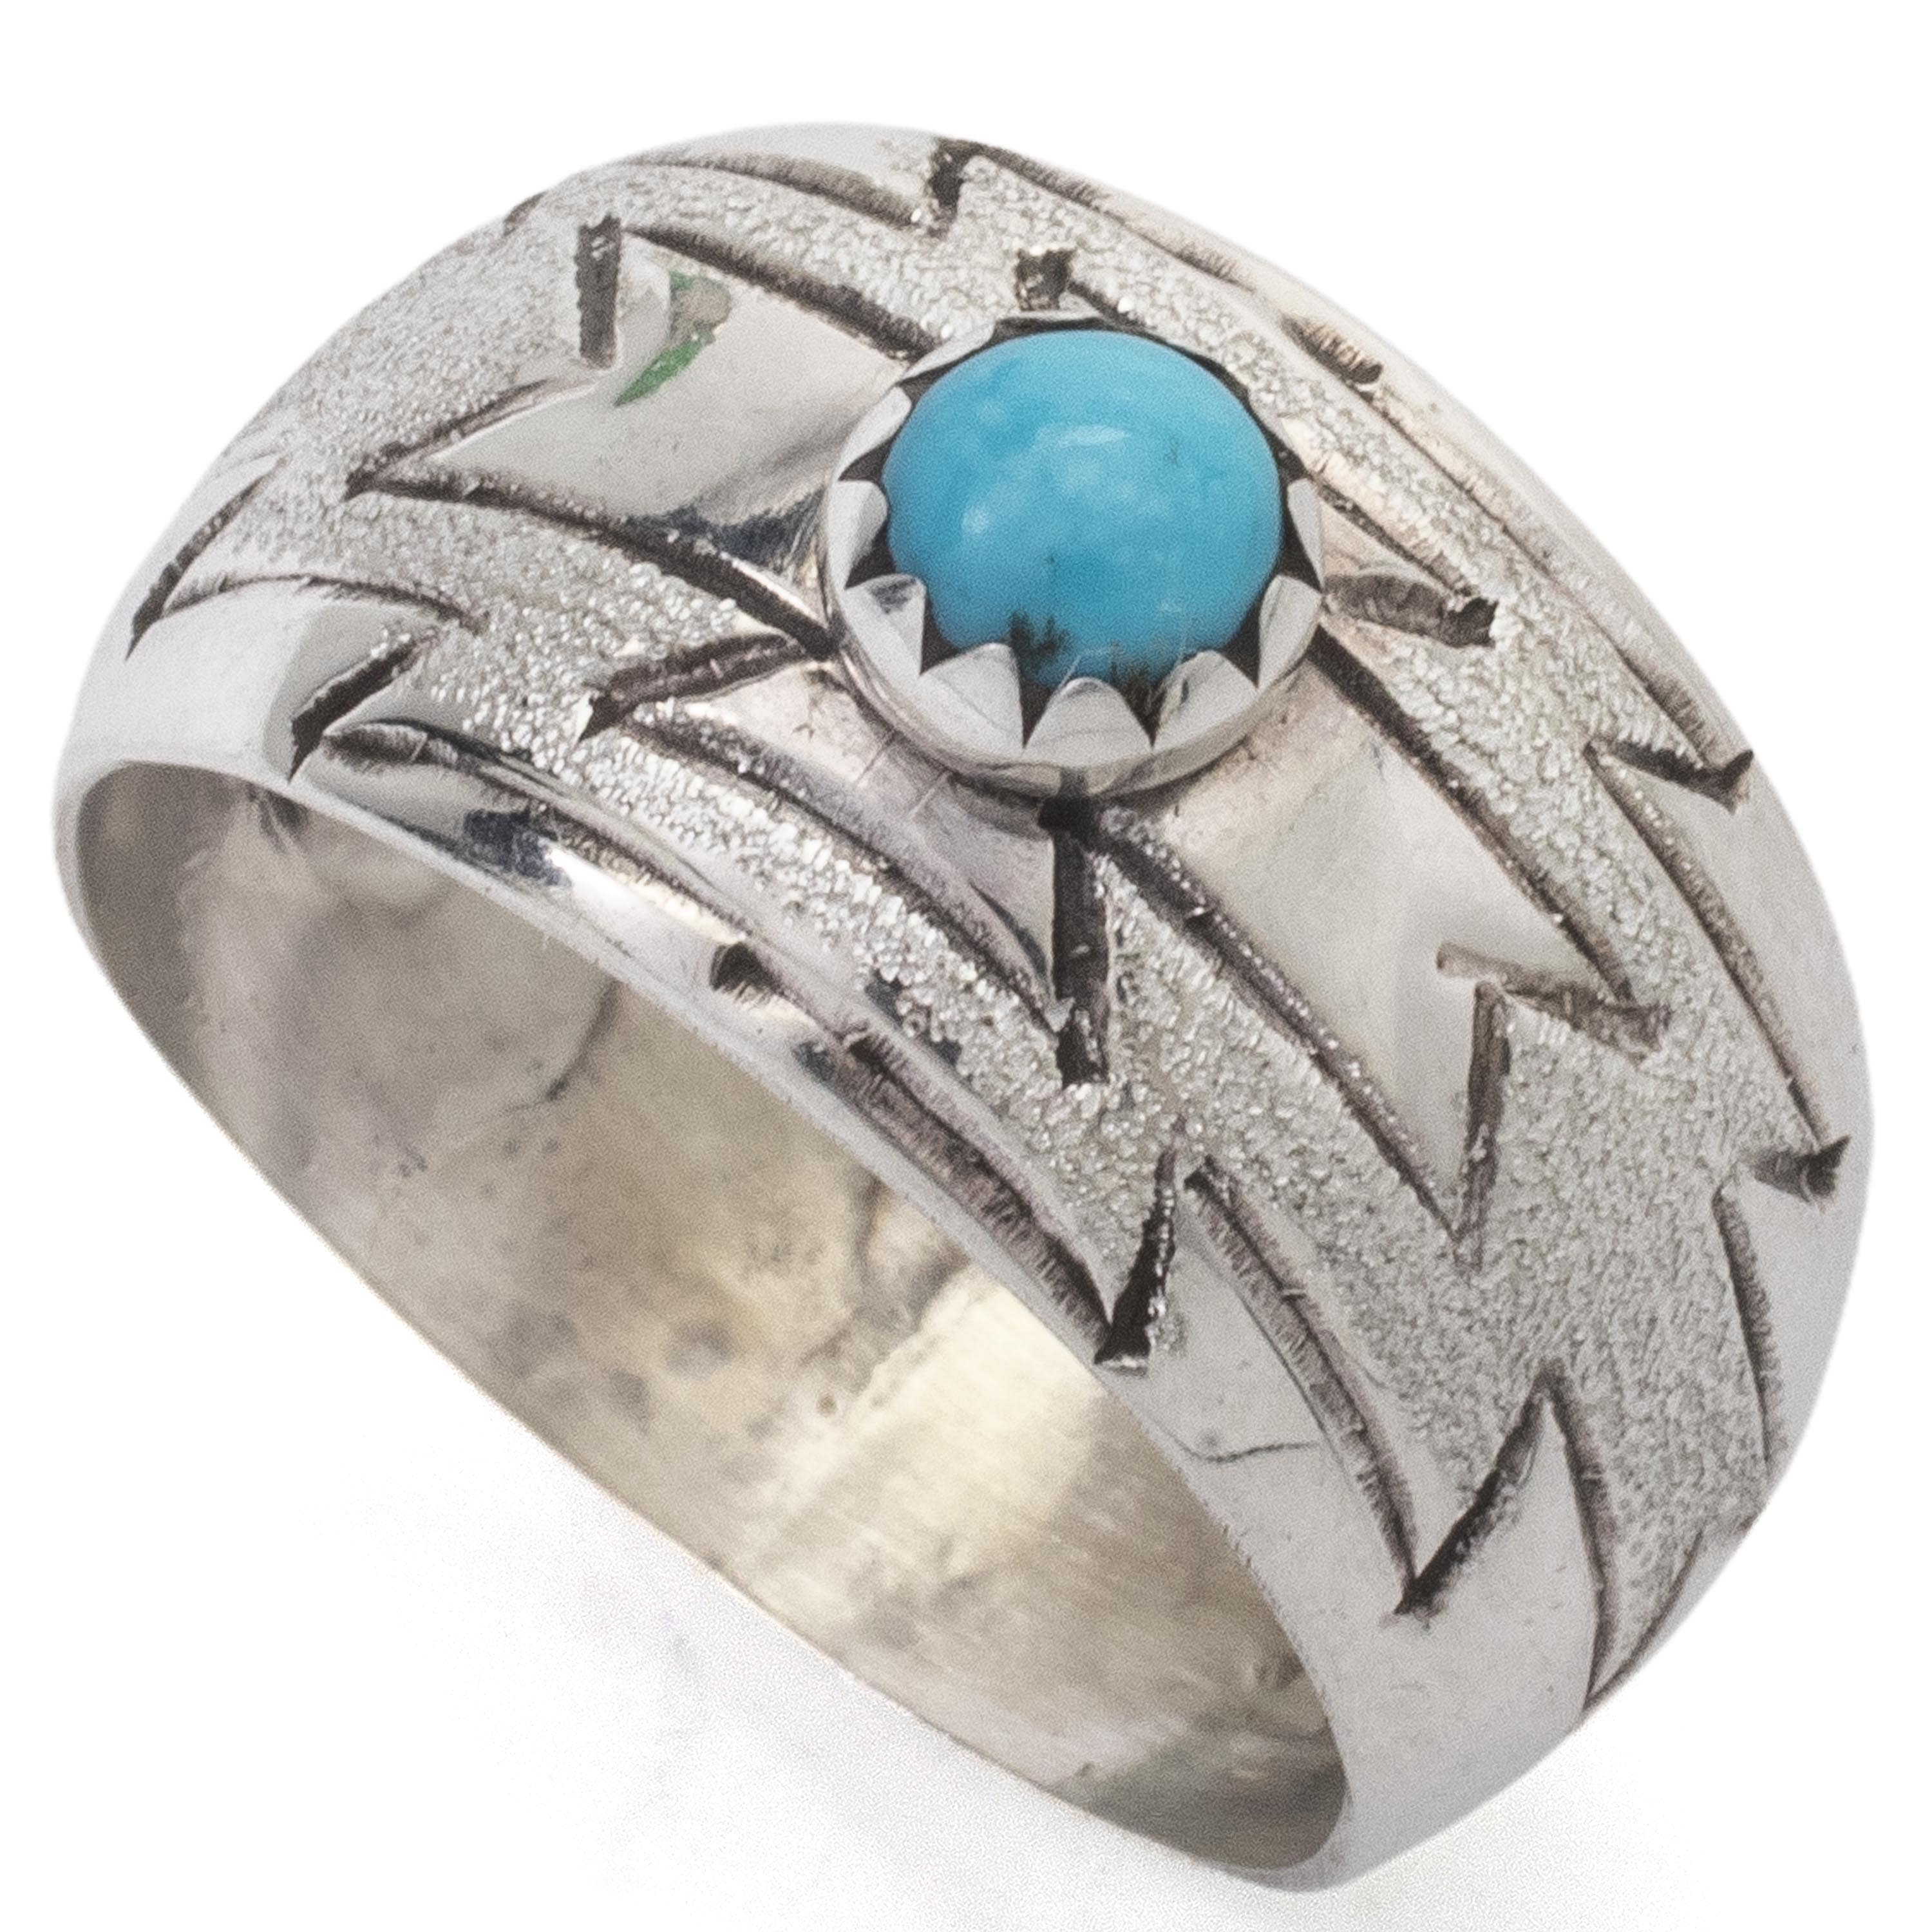 Kalifano Native American Jewelry 6 Florence Tahe Navajo Kingman Turquoise USA Native American Made 925 Sterling Silver Ring NAR120.014.6